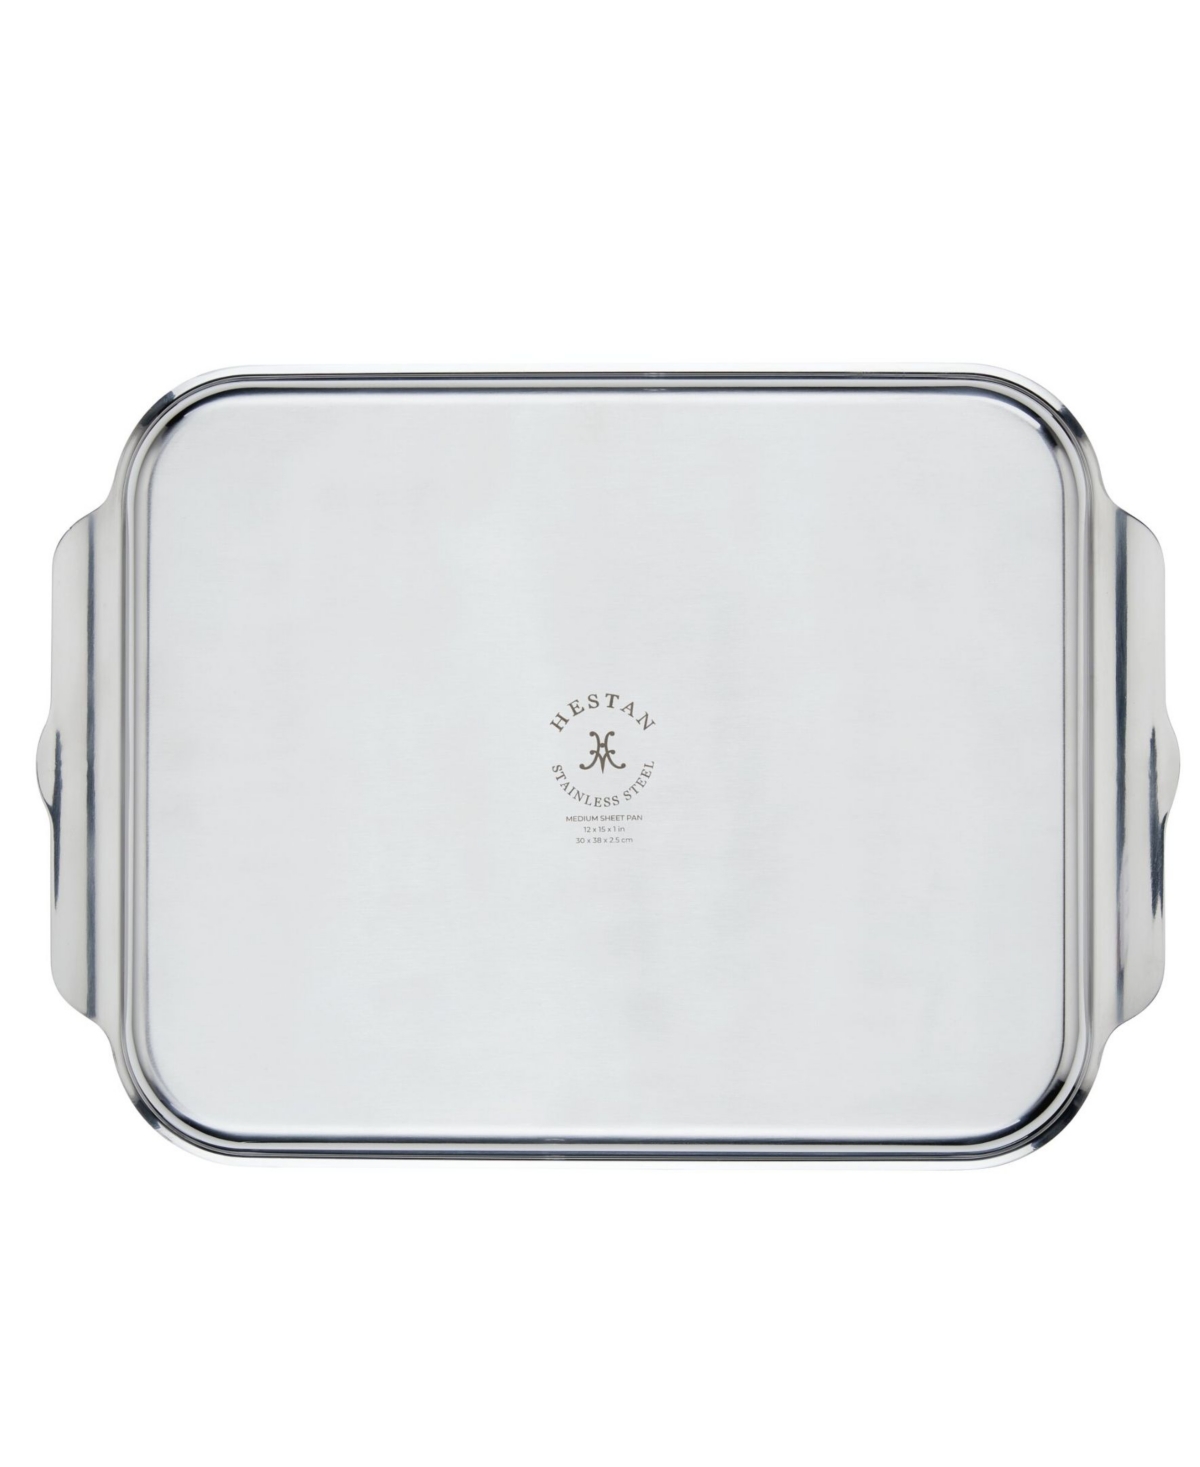 Shop Hestan Provisions Oven Bond Tri-ply Medium Sheet Pan In Stainless Steel